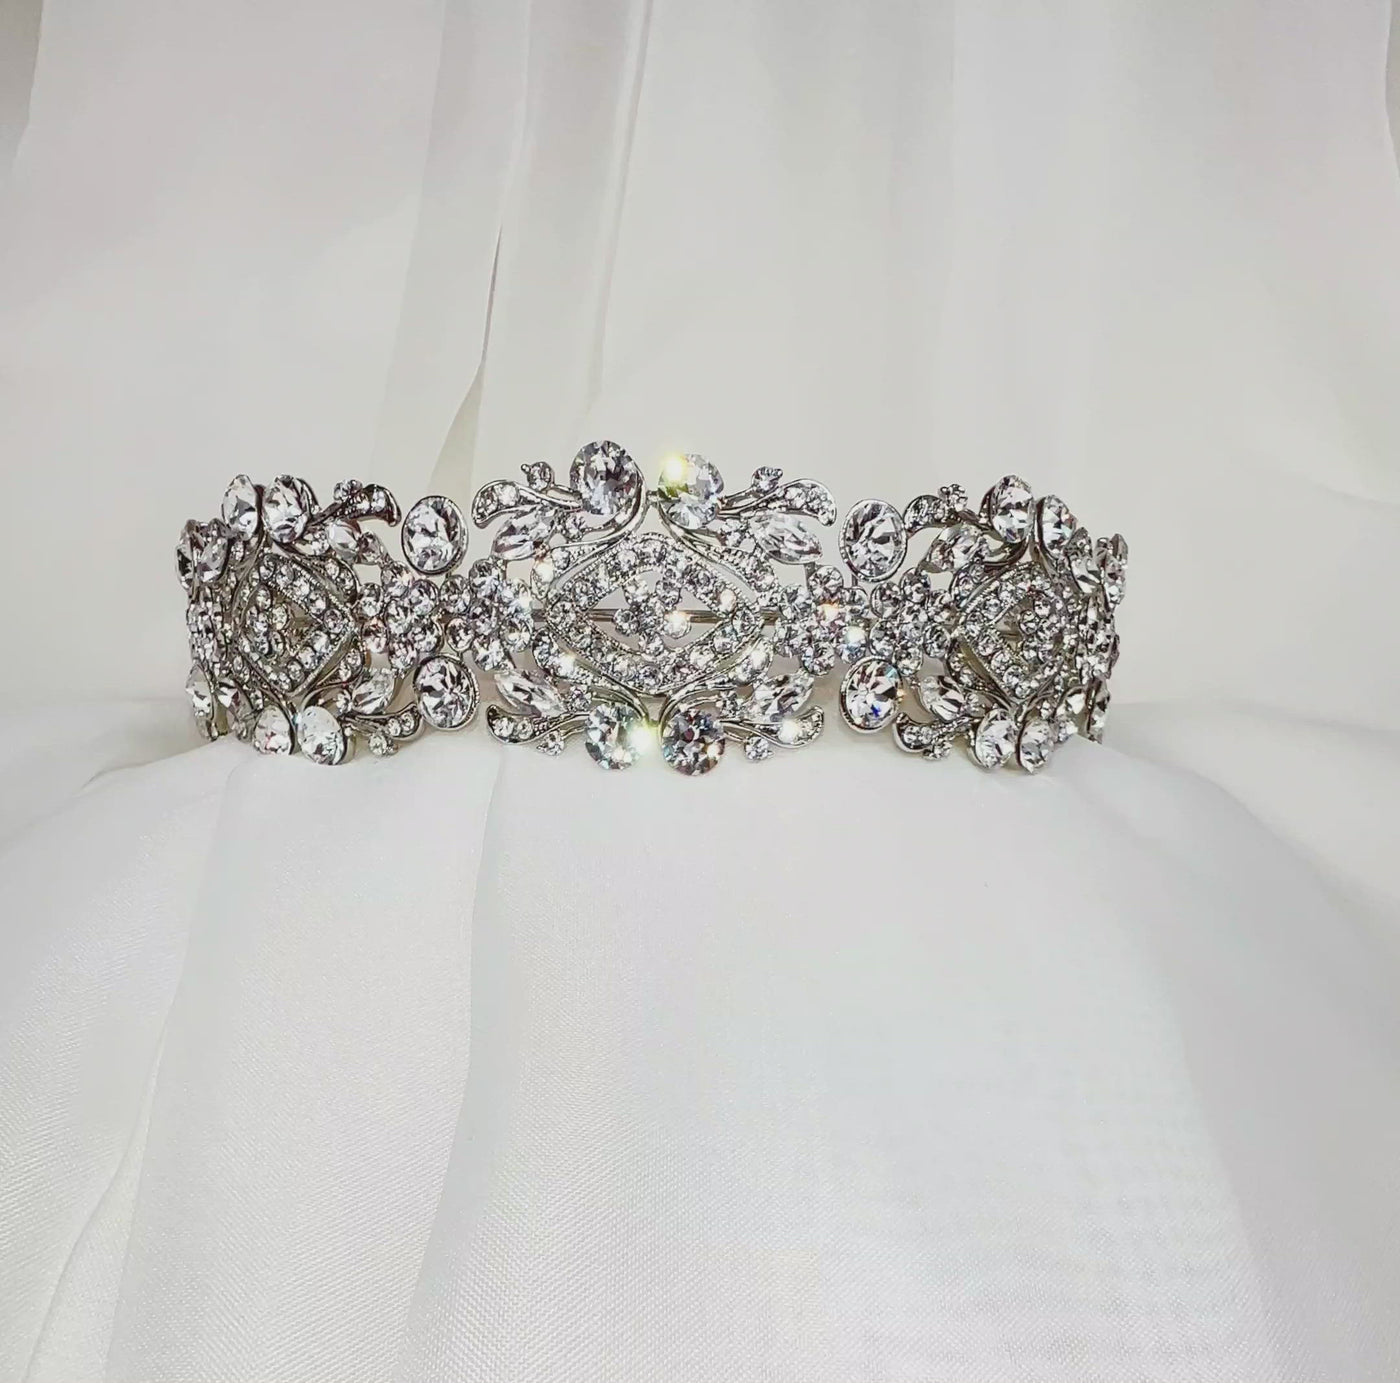 silver bridal headband with swirling floral detailing and varying sizes of round, sparkling crystals